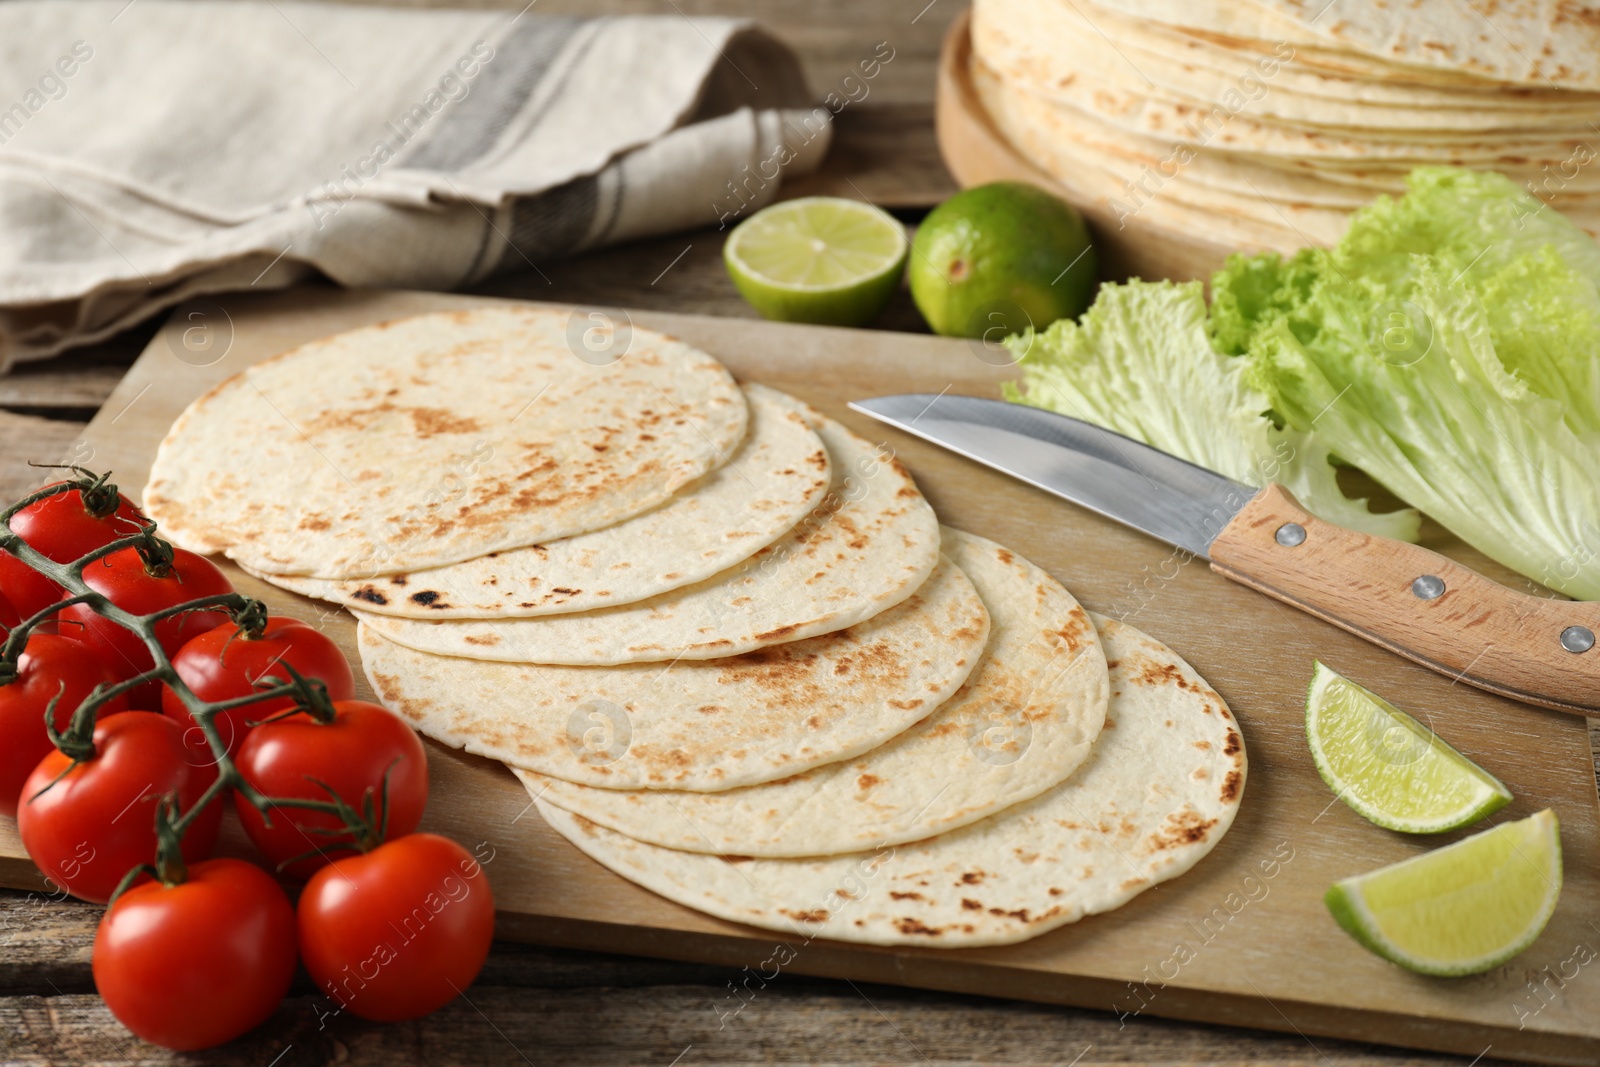 Photo of Tasty homemade tortillas, tomatoes, lime, lettuce and knife on wooden table